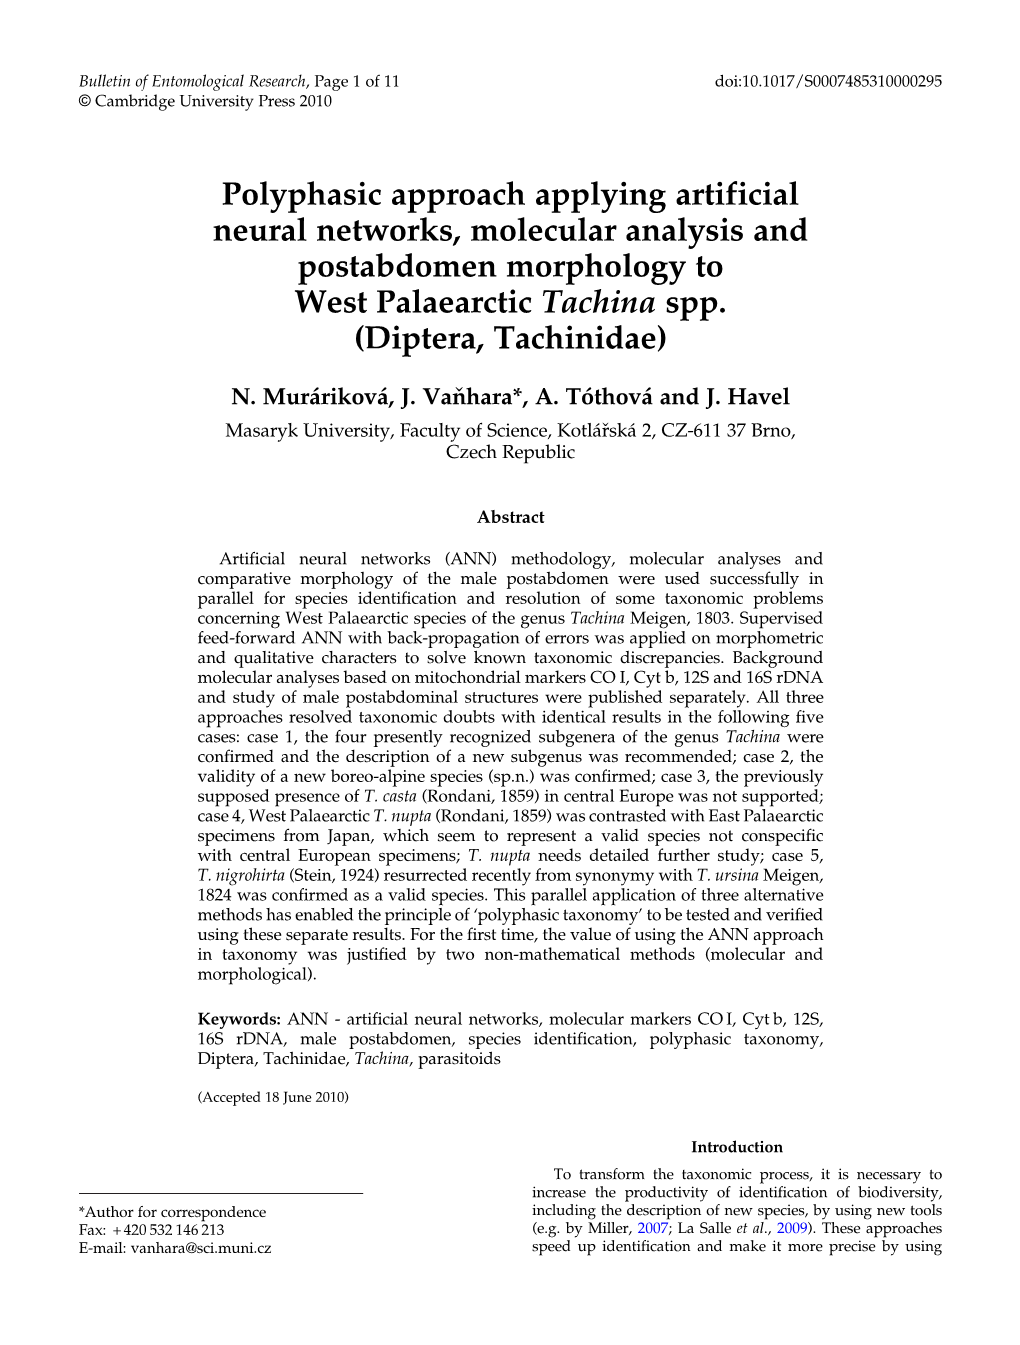 Polyphasic Approach Applying Artificial Neural Networks, Molecular Analysis and Postabdomen Morphology to West Palaearctic Tachina Spp